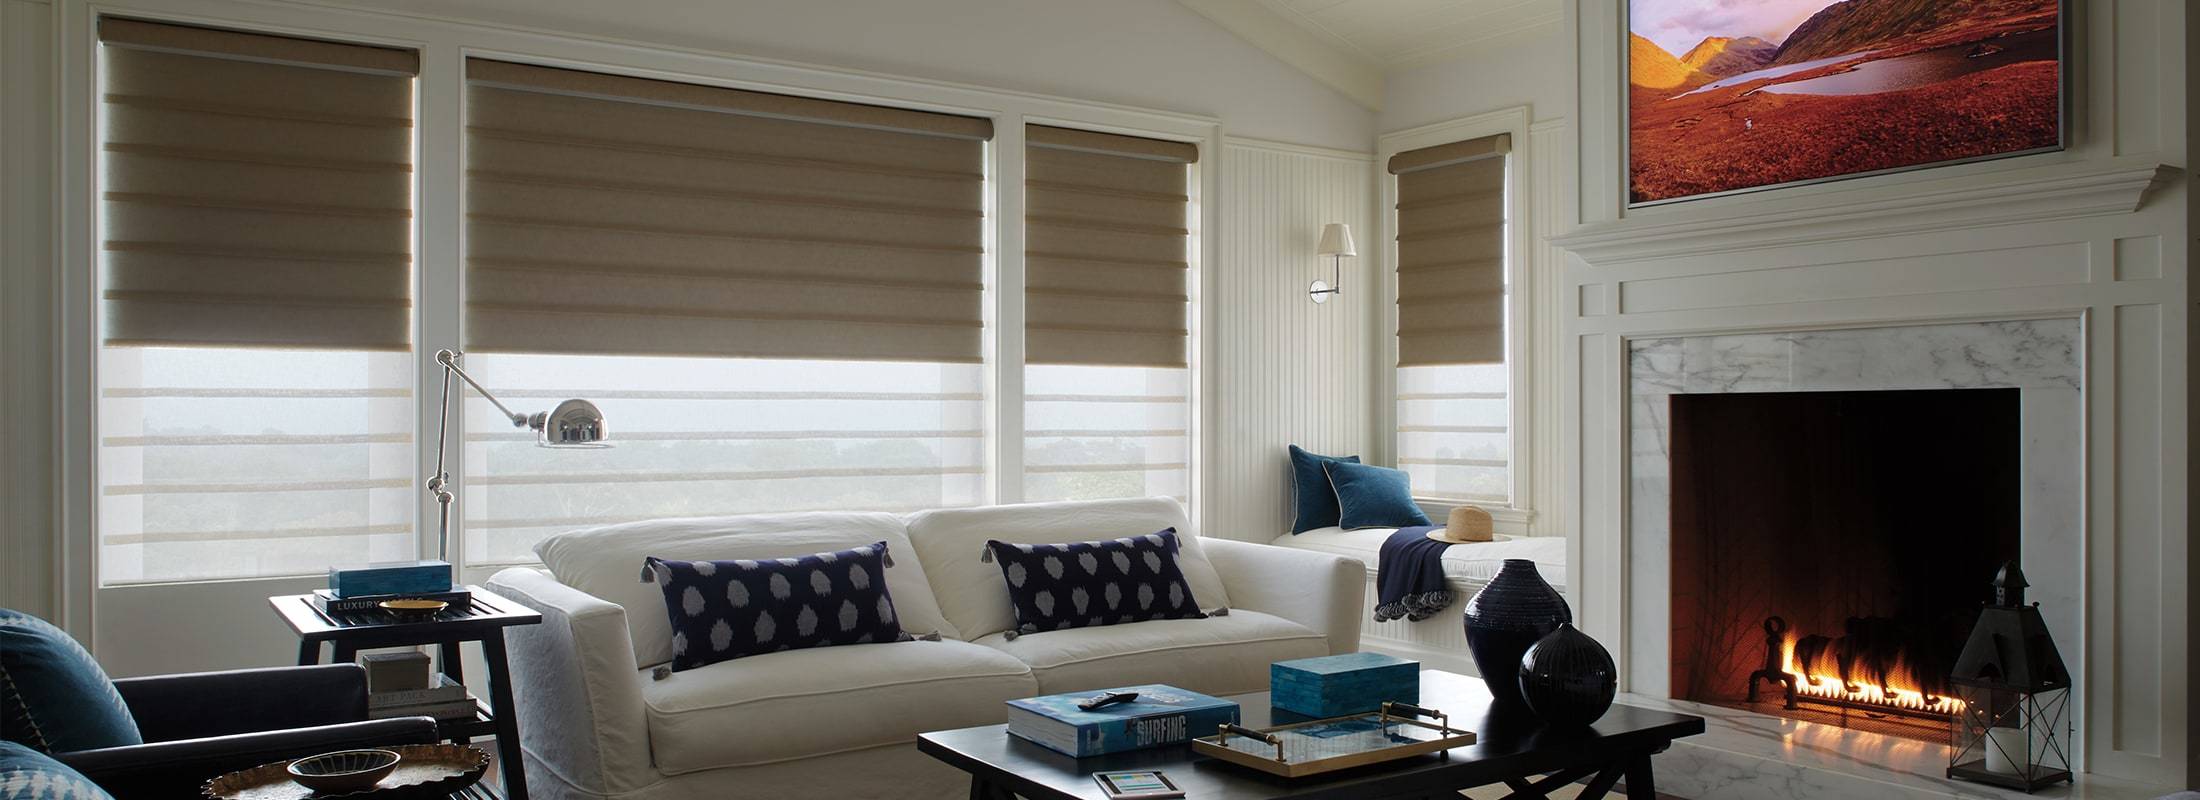 Vignette® Modern Roman Shades feature consistent folds and no exposed rear cords, keeping windows uncluttered and safer. Choose from different fold styles and sizes, and beautiful fabrics that are low maintenance and easy to clean. Learn more about Vignette® Modern Roman Shades.